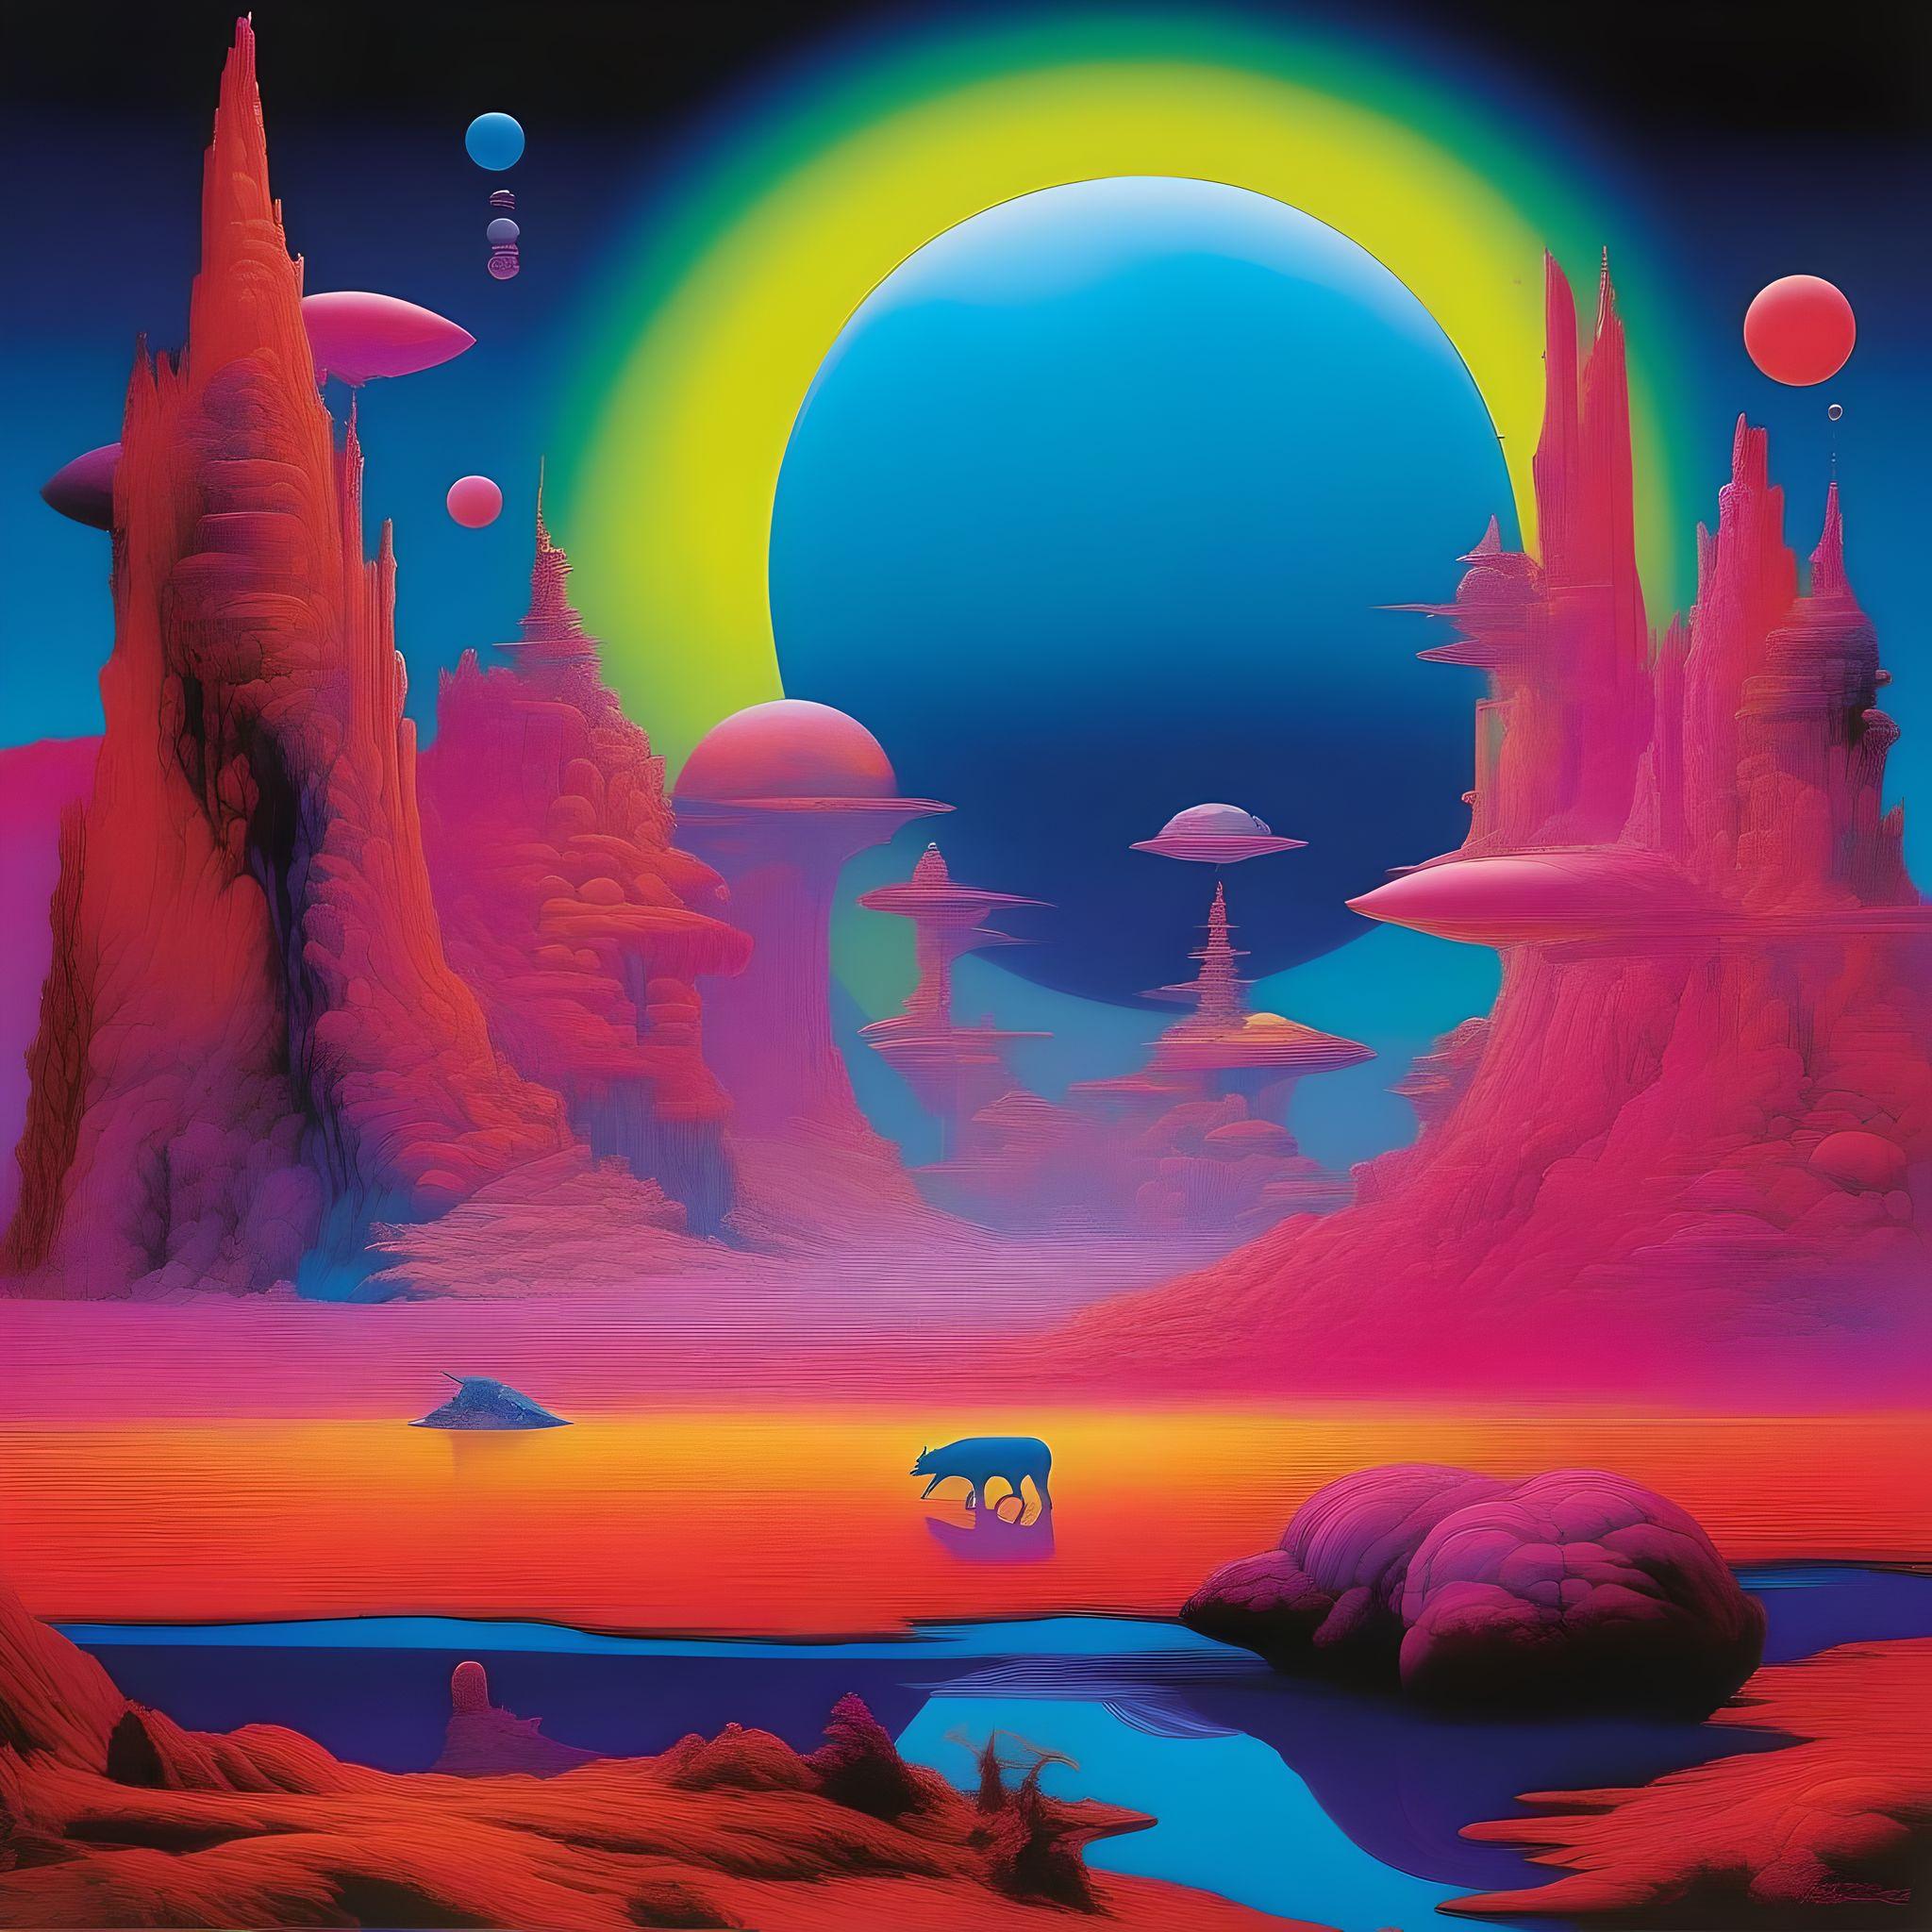 In the Style of Surrealism – reimagine Tales from Topographic Oceans’ by Roger Dean — using neon Color